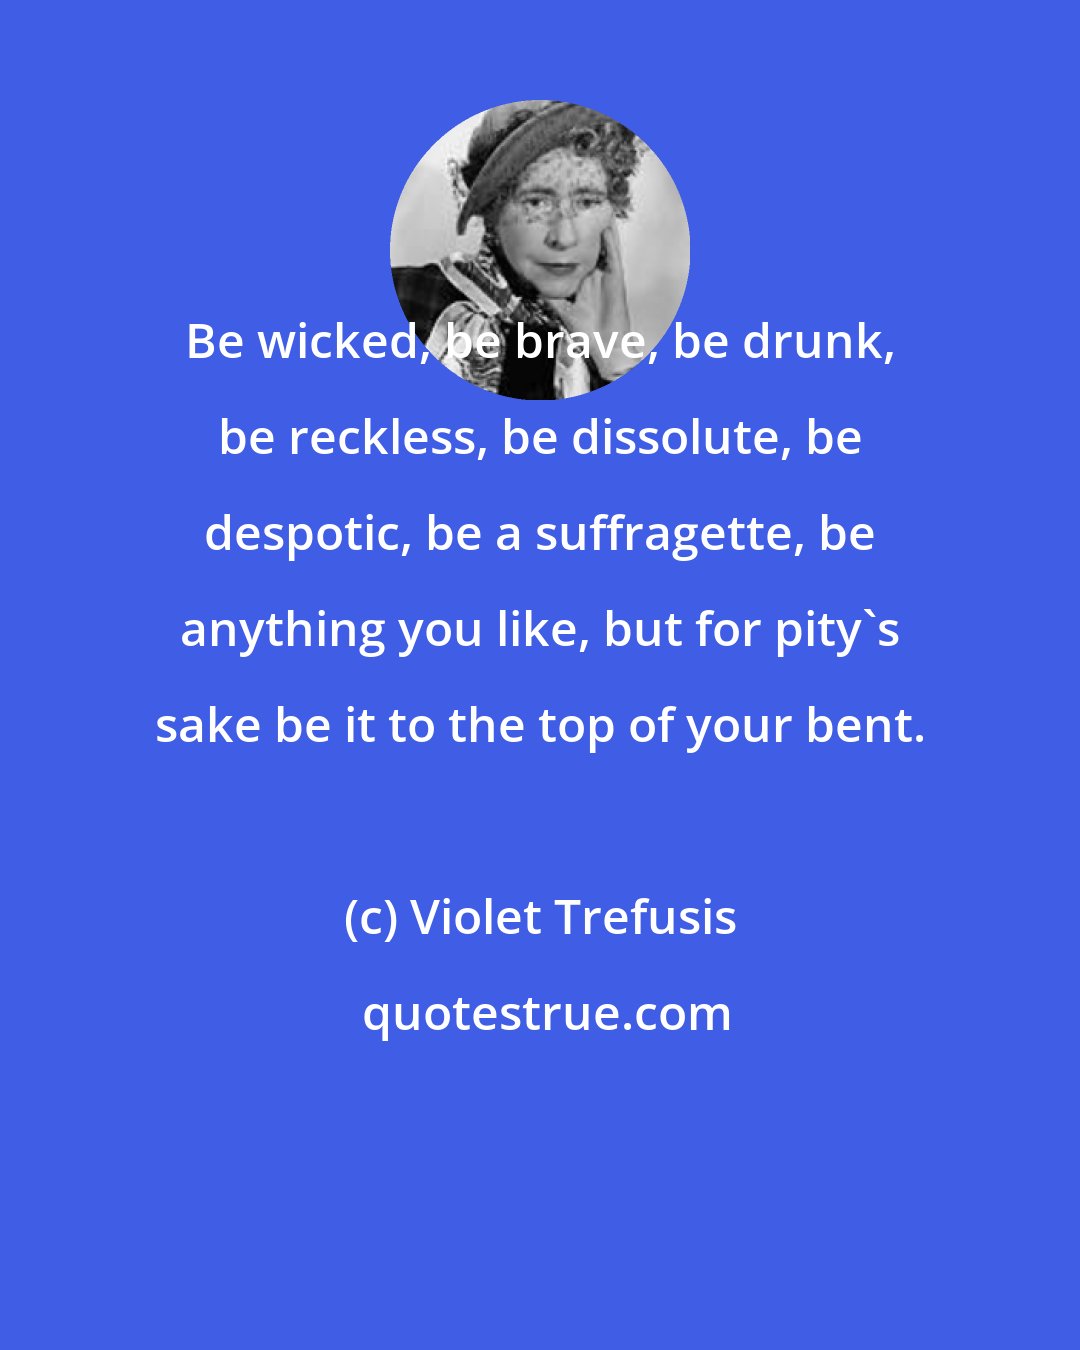 Violet Trefusis: Be wicked, be brave, be drunk, be reckless, be dissolute, be despotic, be a suffragette, be anything you like, but for pity's sake be it to the top of your bent.